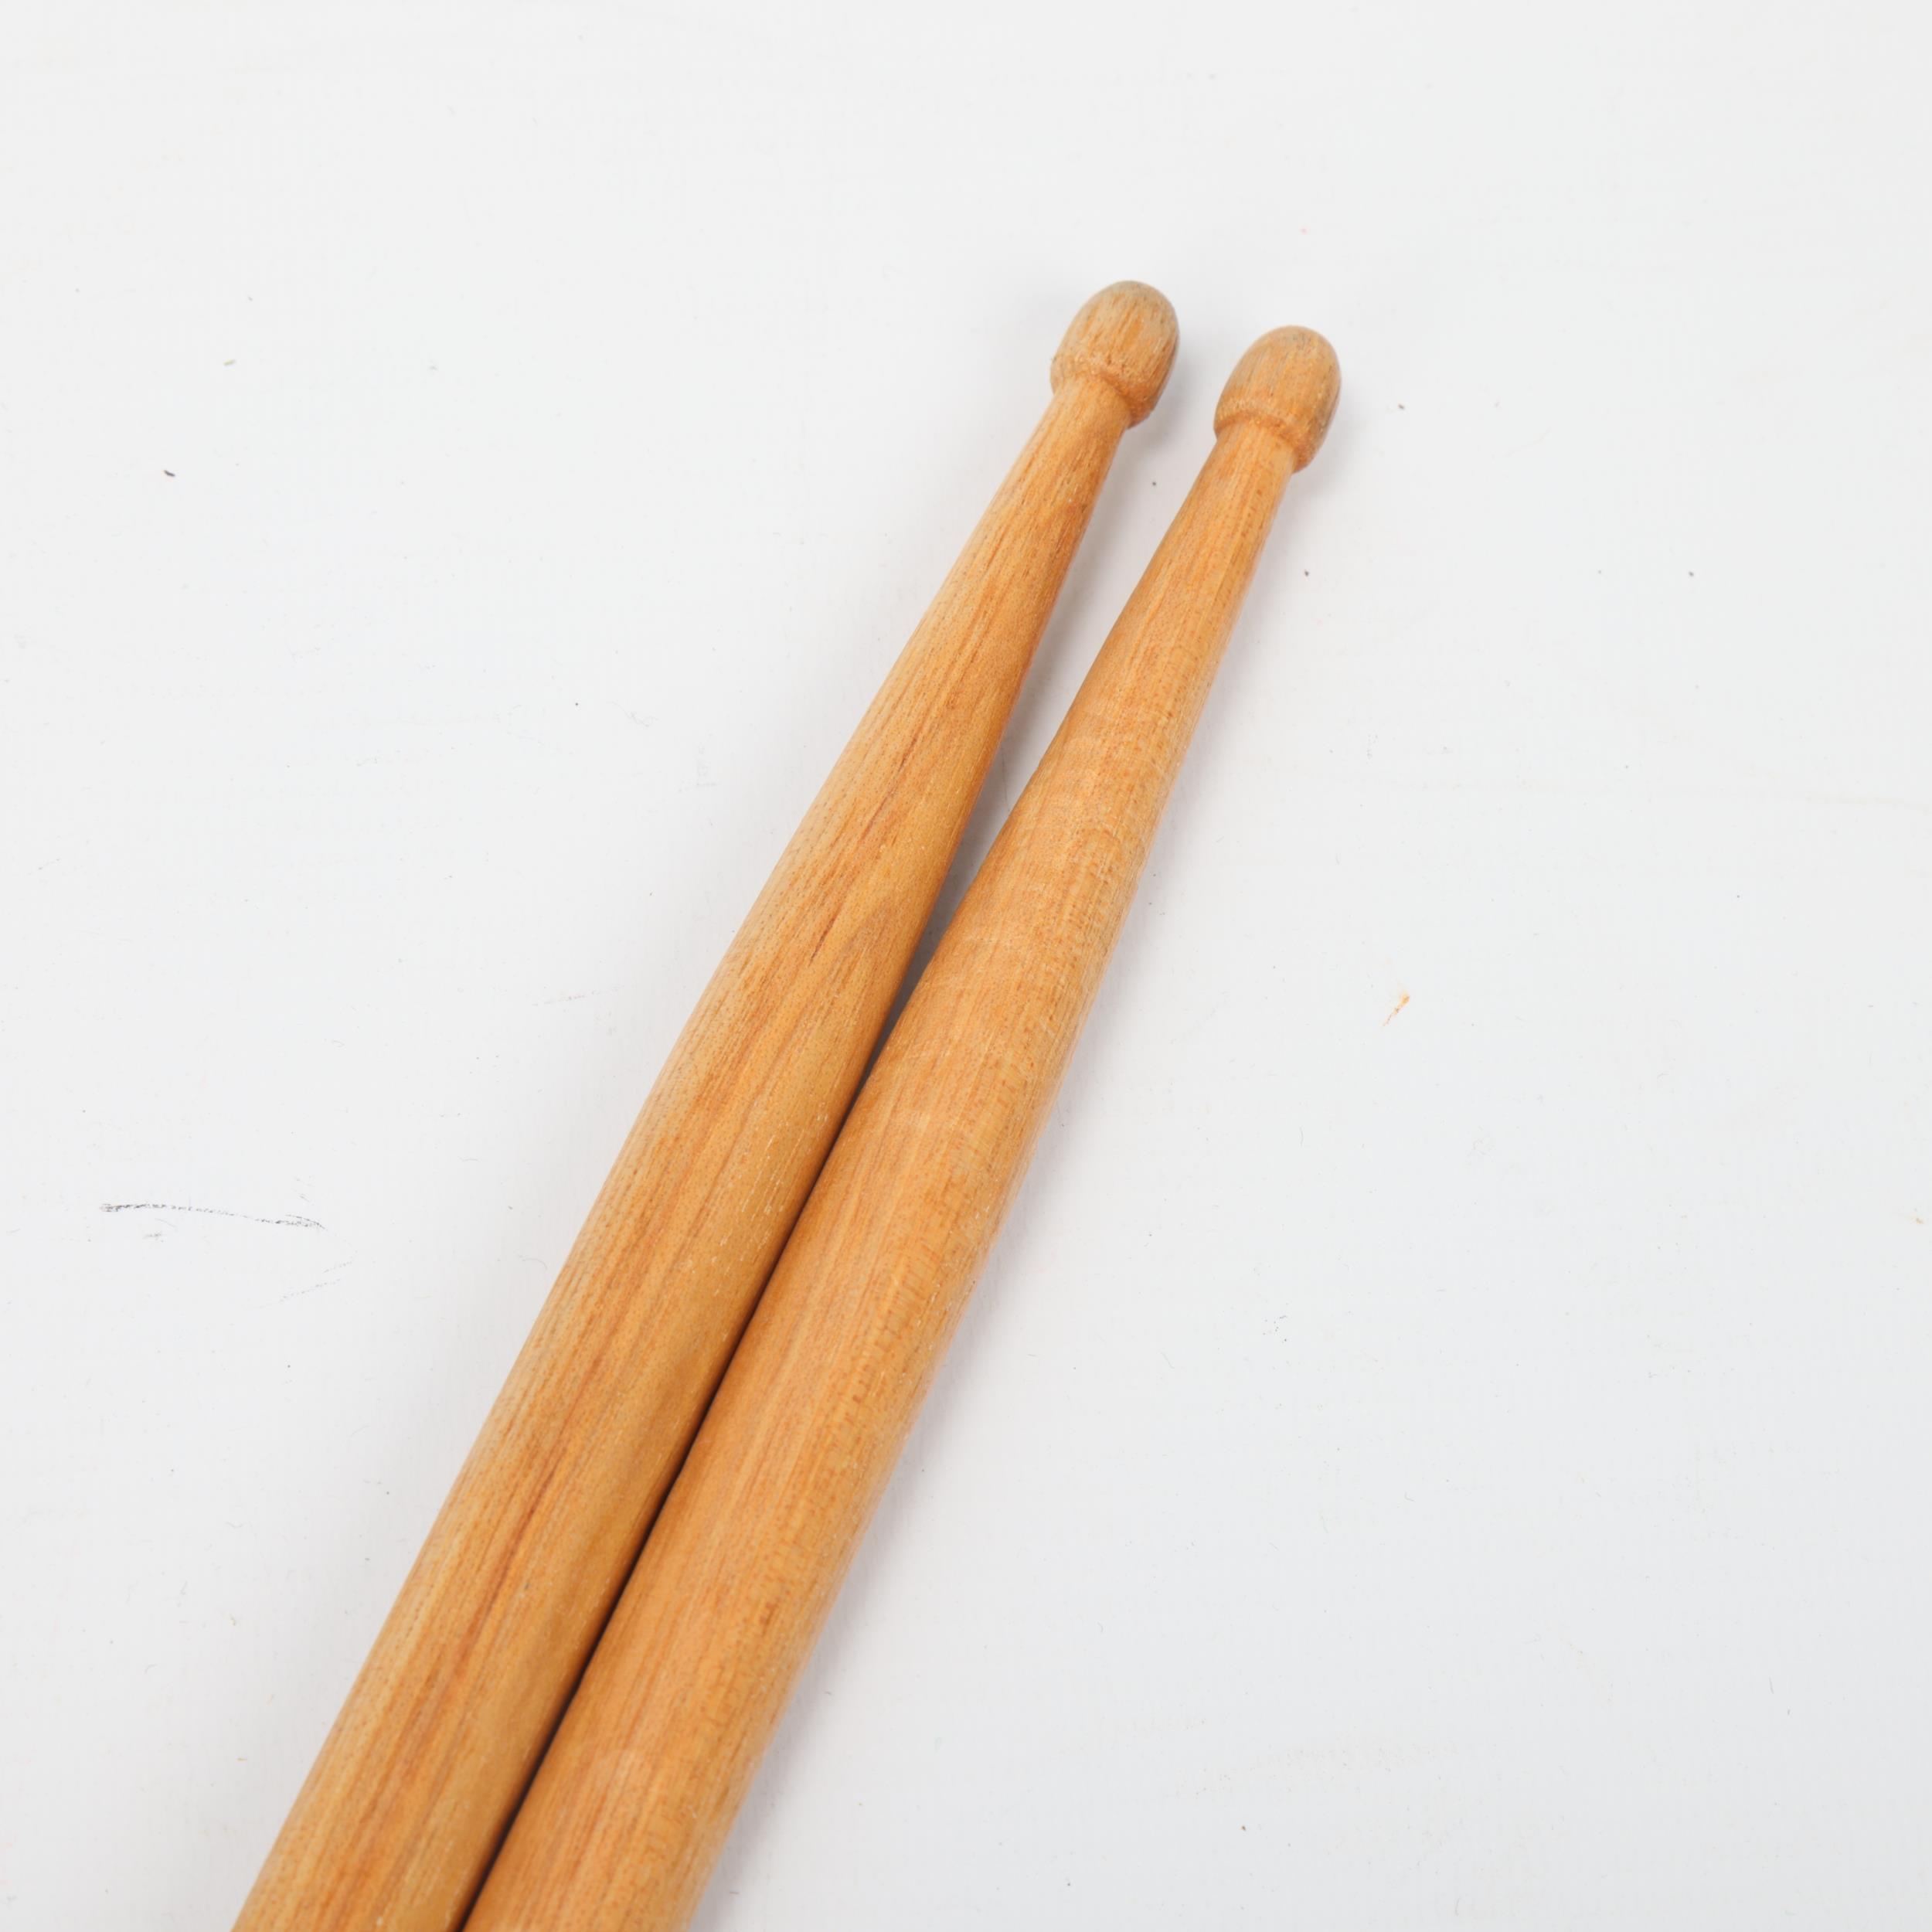 Two USED KIT TOOLS 'B NIGHTSHADE' Hickory DRUMSTICKS belonging to MITCH MITCHELL. - Image 3 of 3